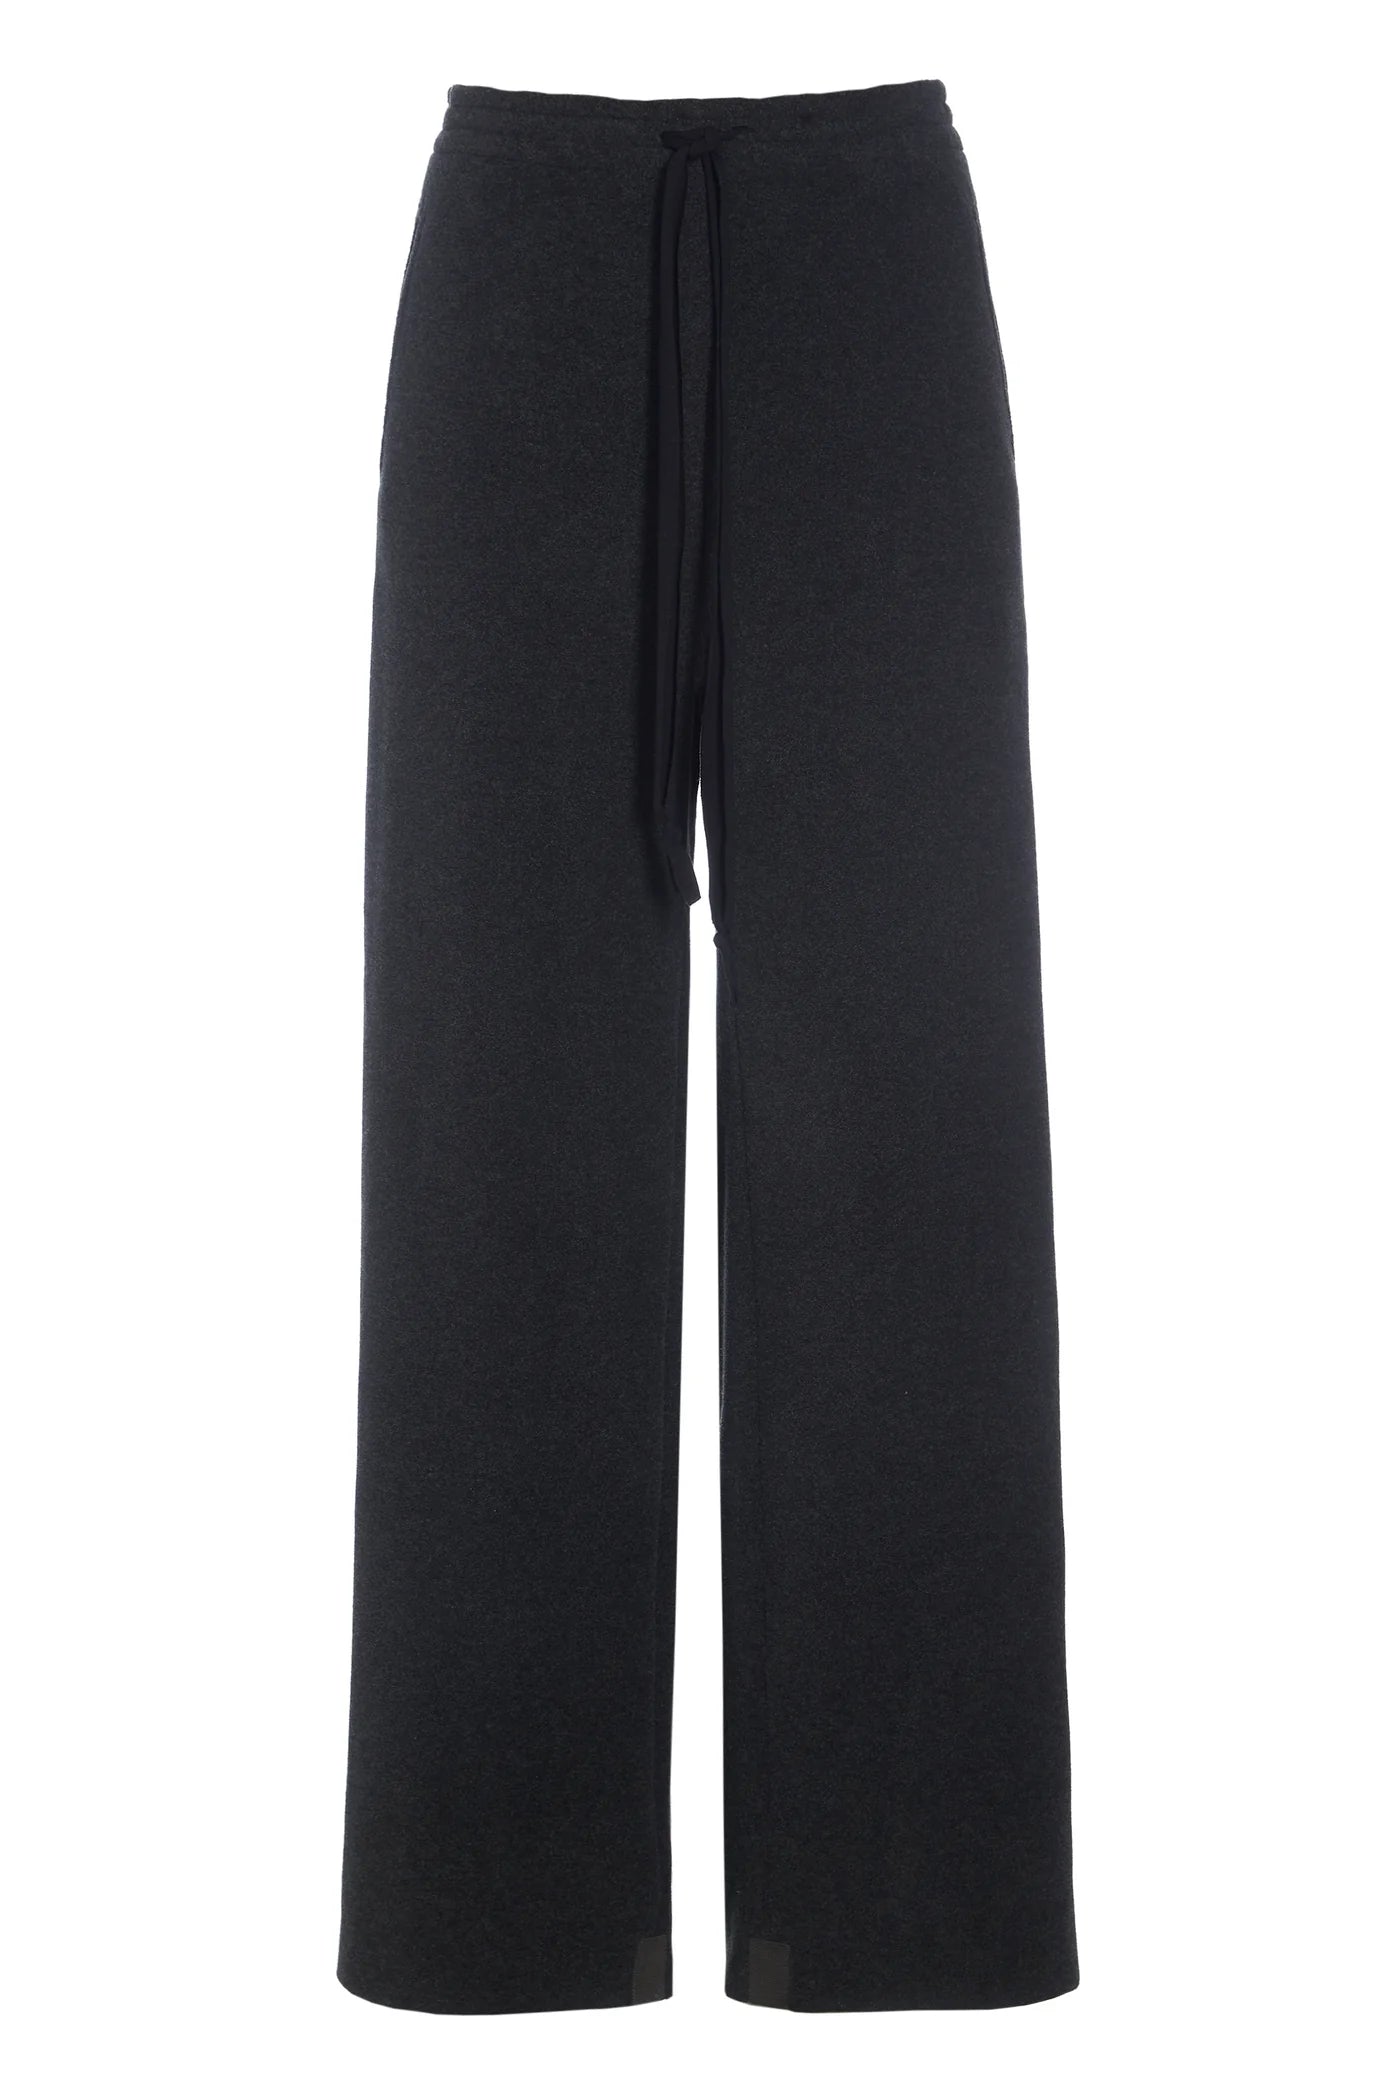 Henriette Steffensen Flare Trousers in Soft Black-Womens-Ohh! By Gum - Shop Sustainable